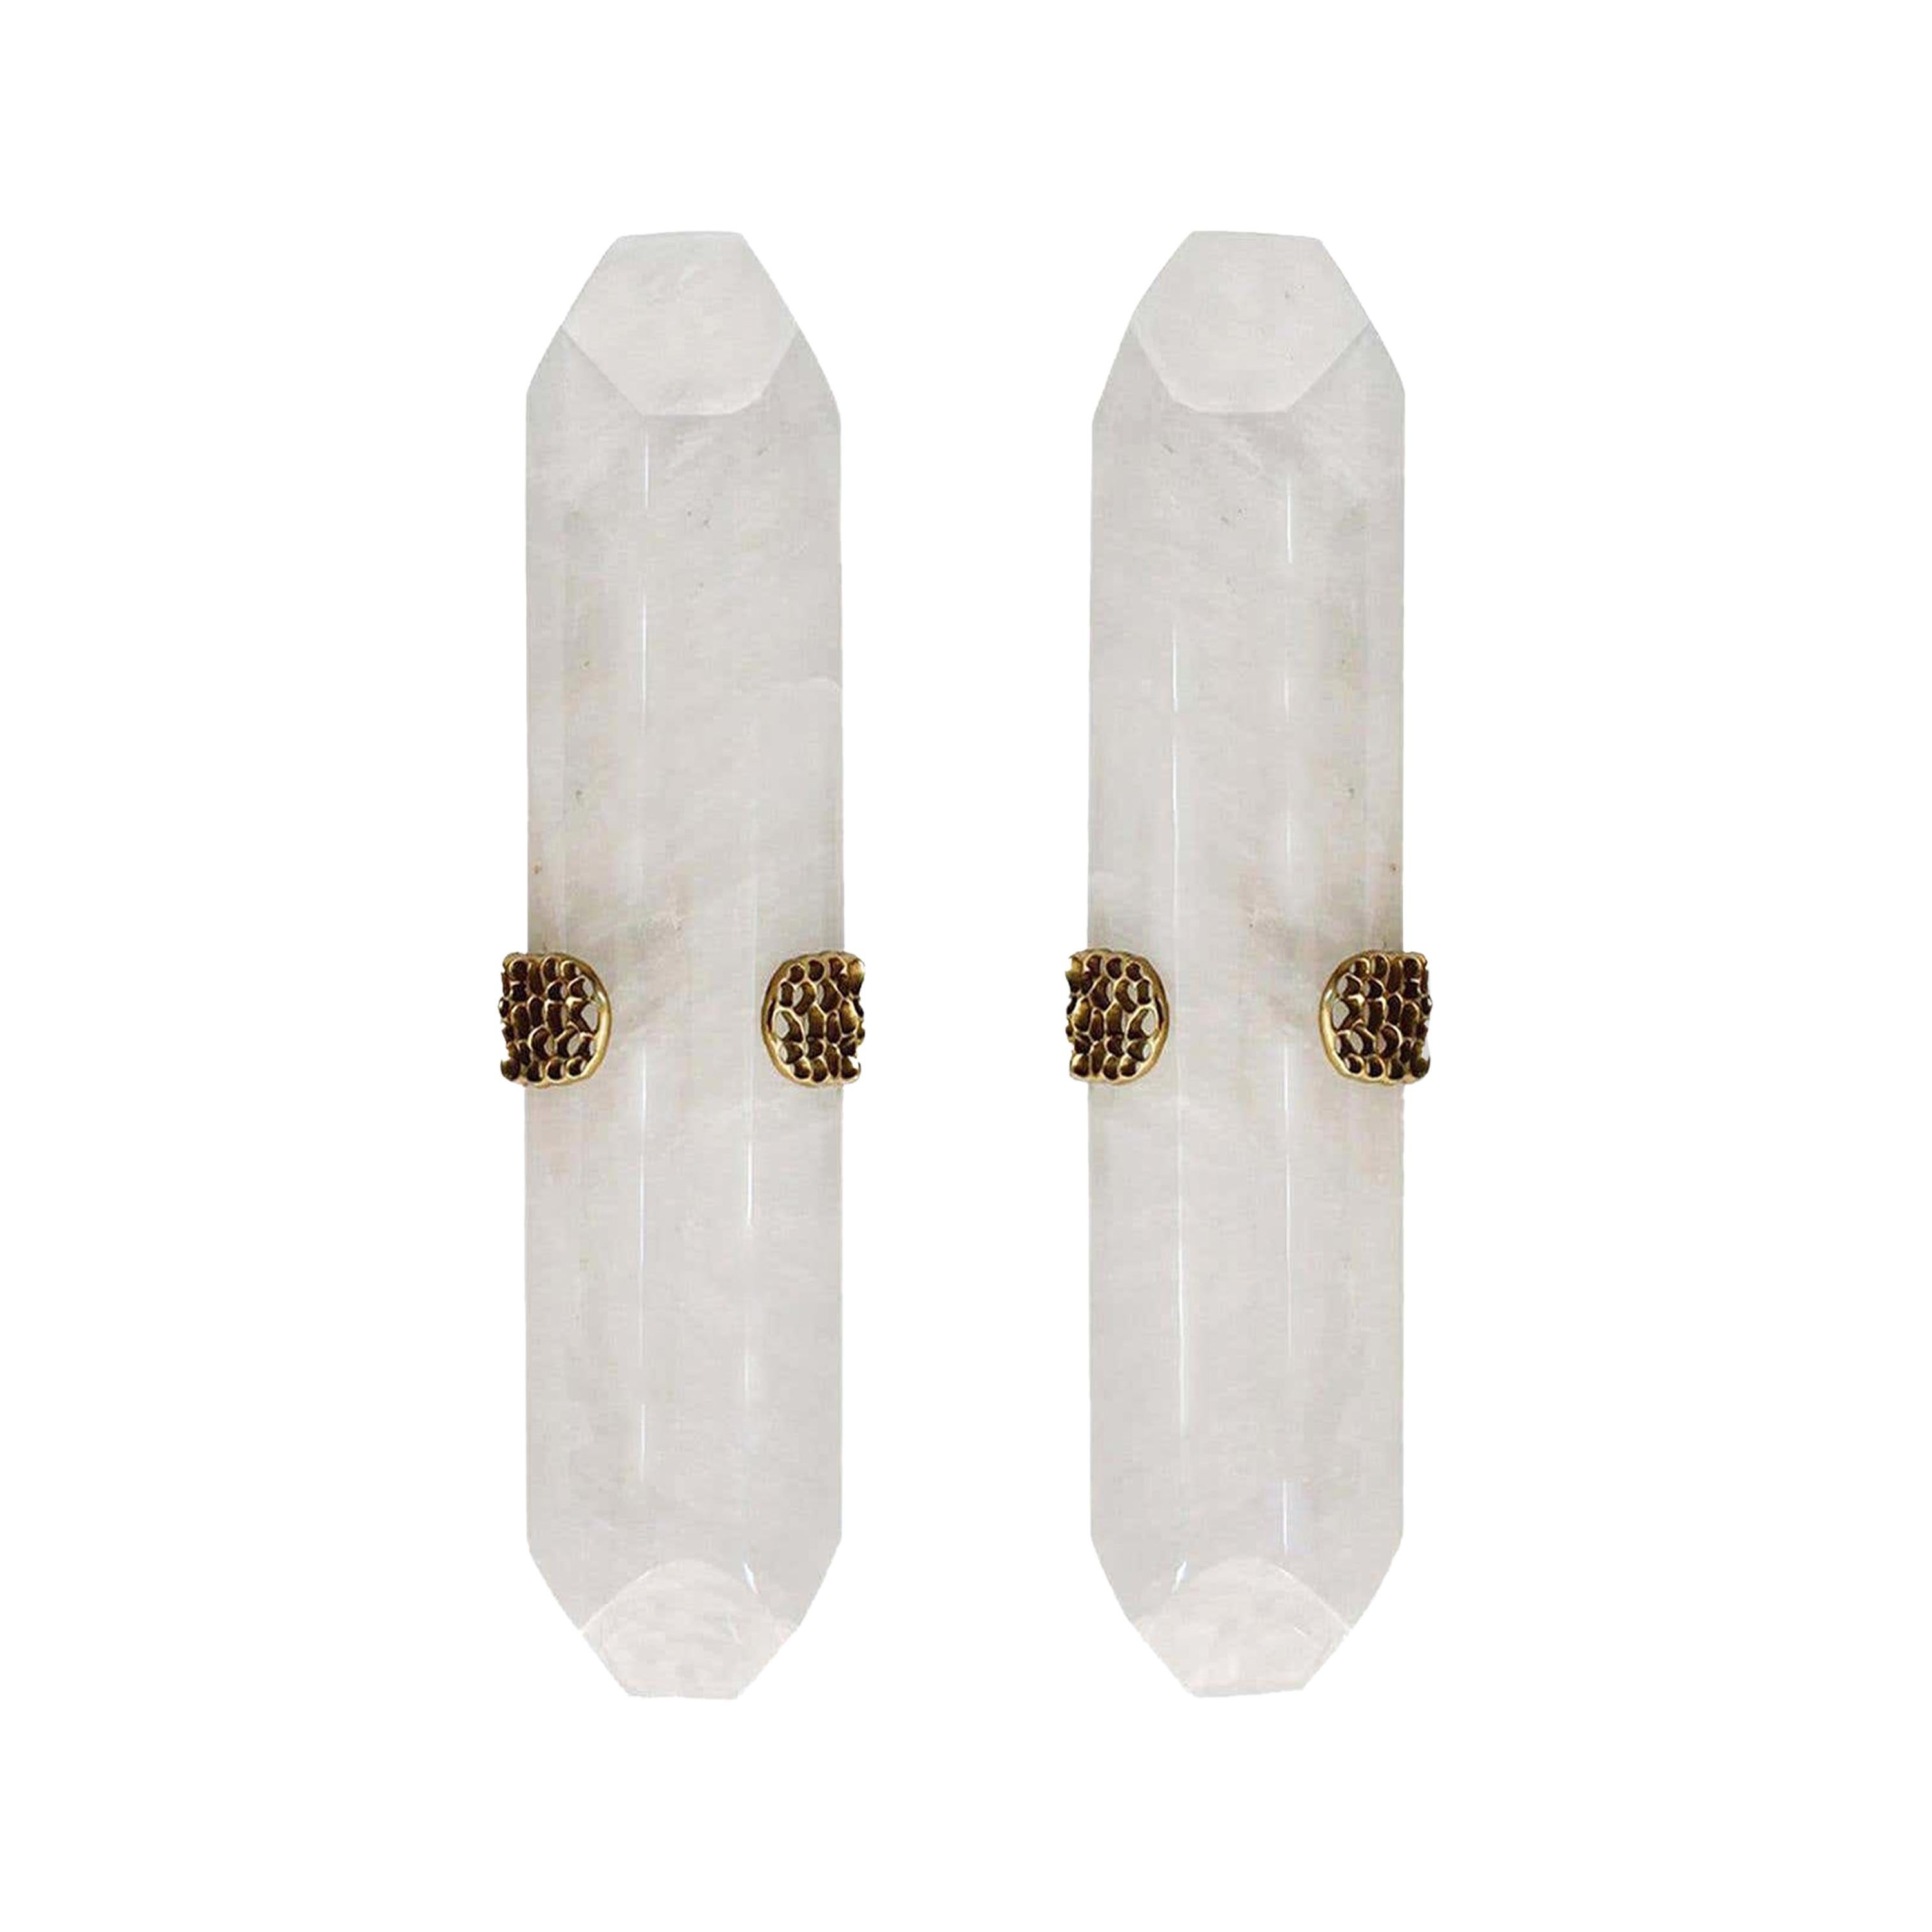 TDW22 Rock Crystal Sconces by Phoenix For Sale